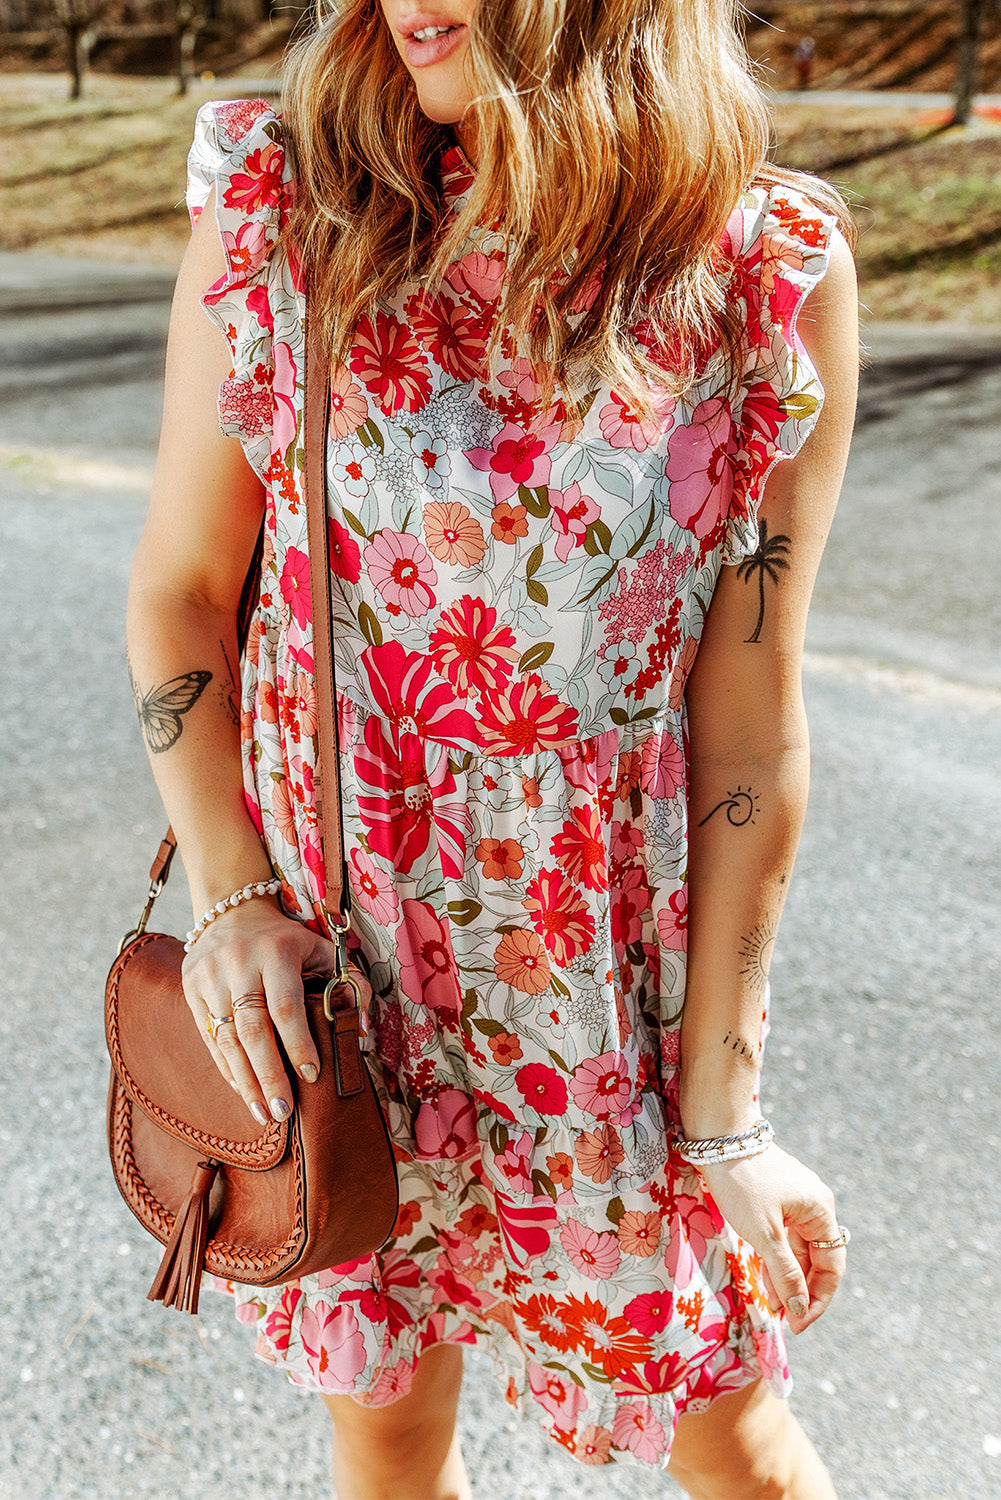 Floral Print Casual Ruffled Sleeveless Tiered Short Dress